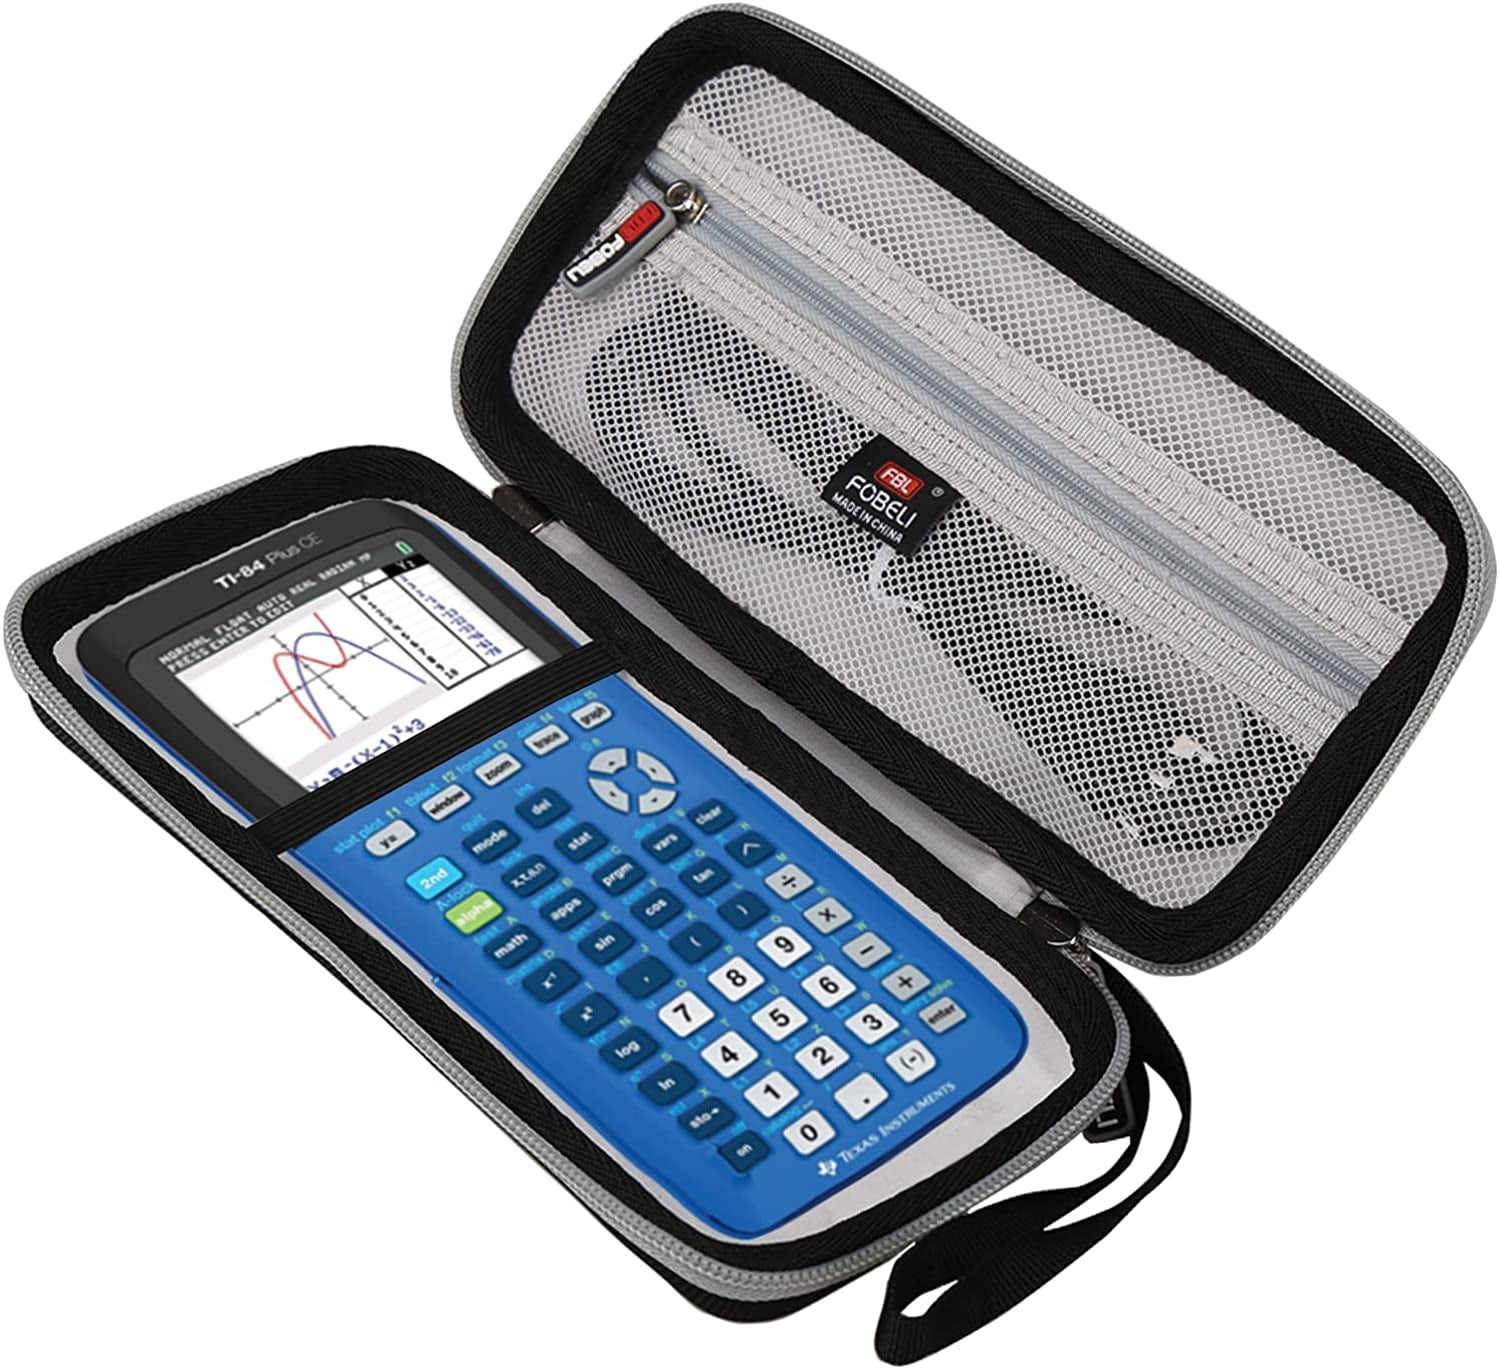 Carrying Case for Texas Instruments TI-84 plus CE Color Graphing Calculator, Waterproof Shockproof Protective Portable Travel Storage Bag